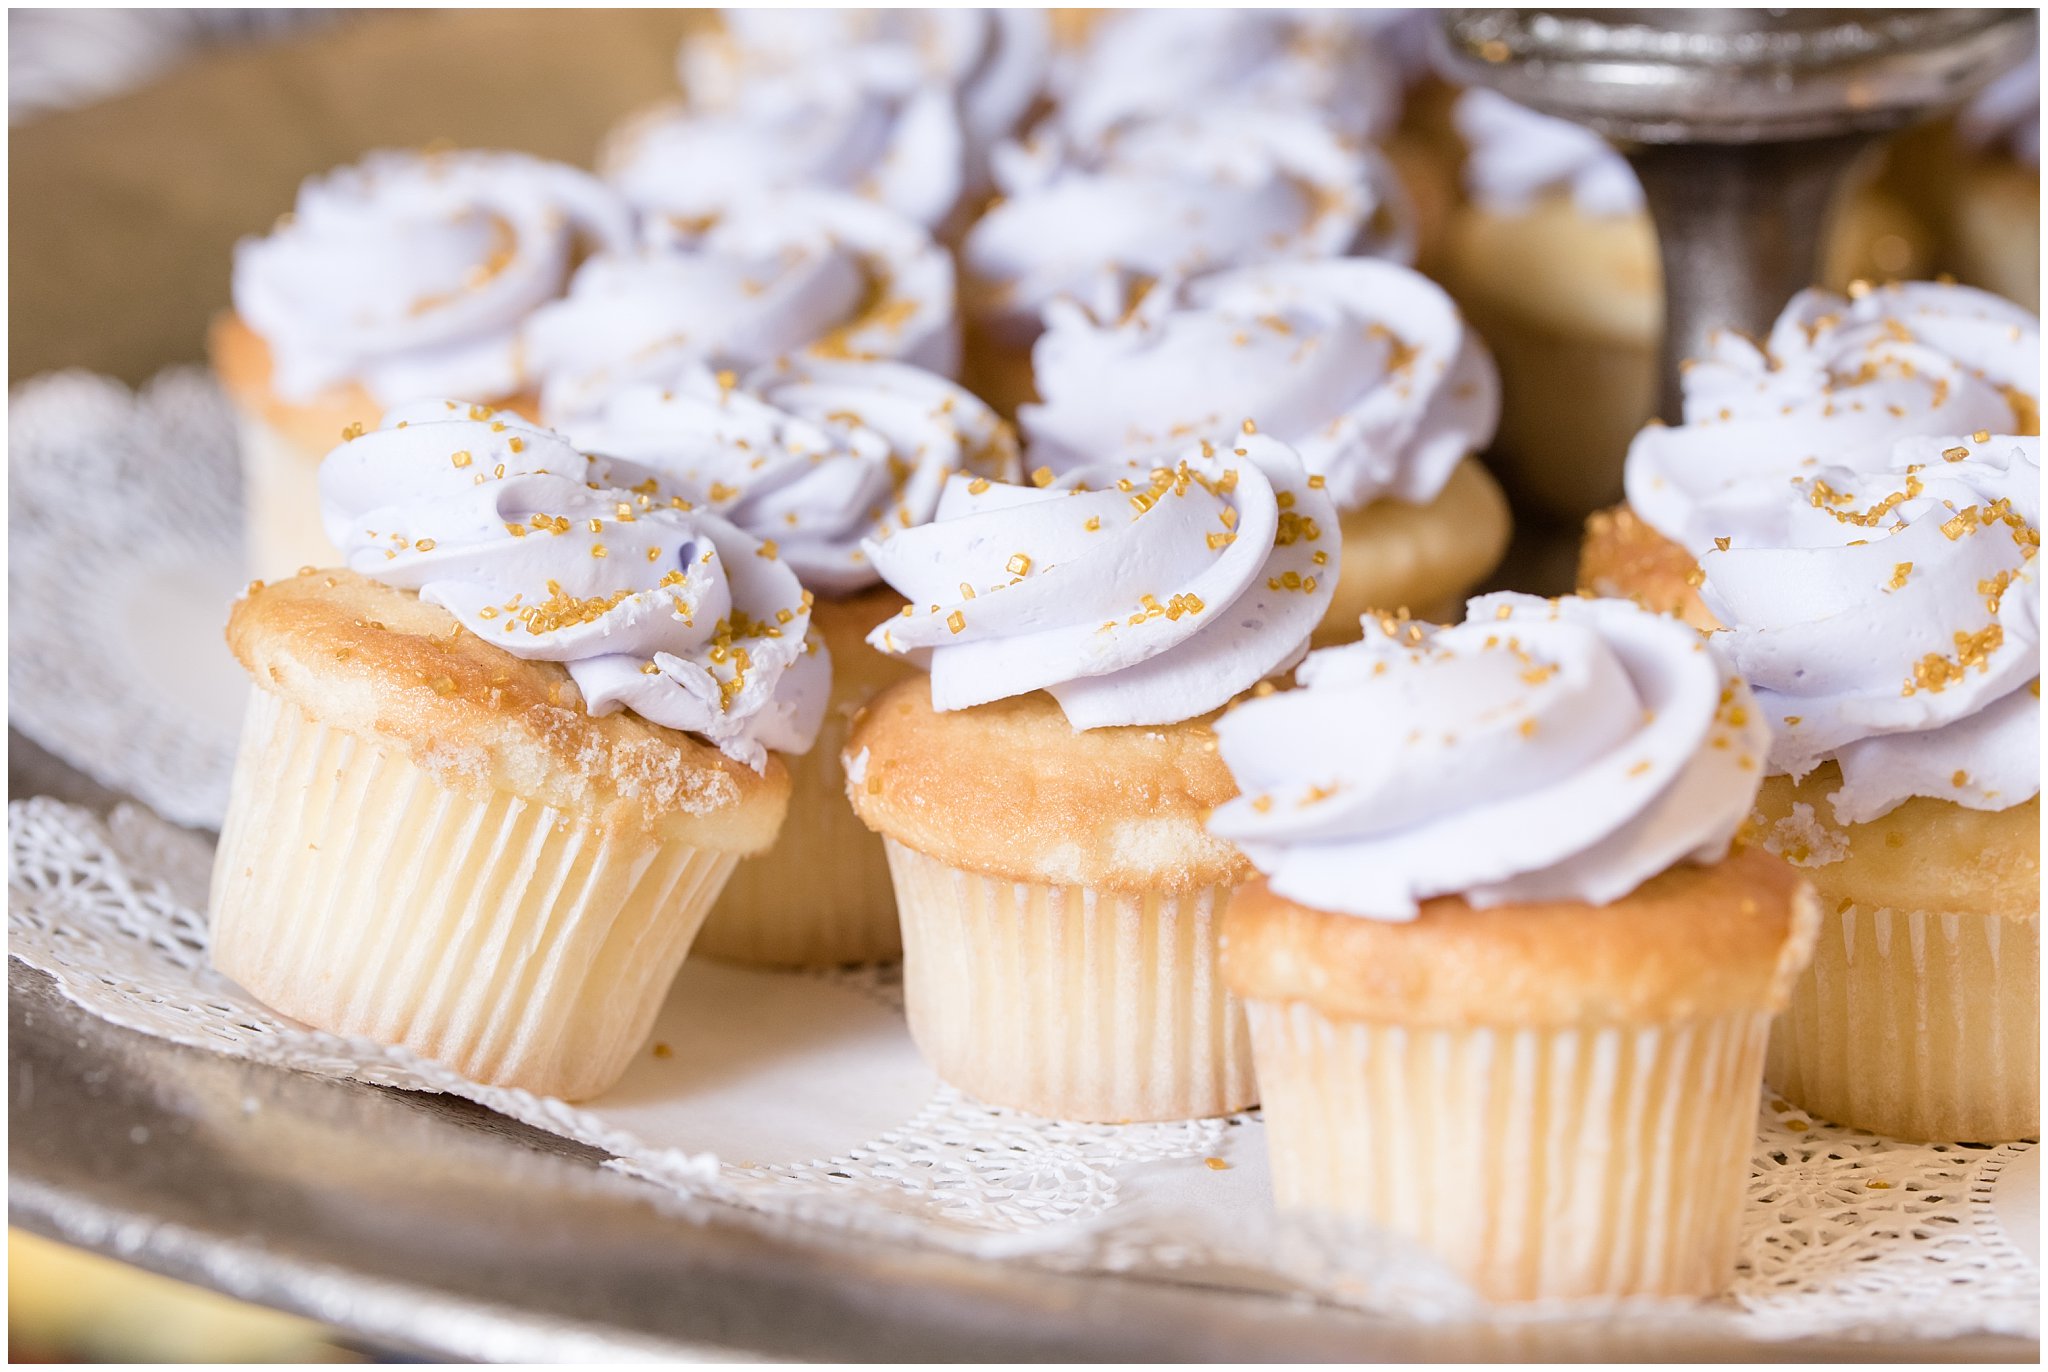 Details of wedding food | Wedding cupcakes with icing | Jessie and Dallin Photography